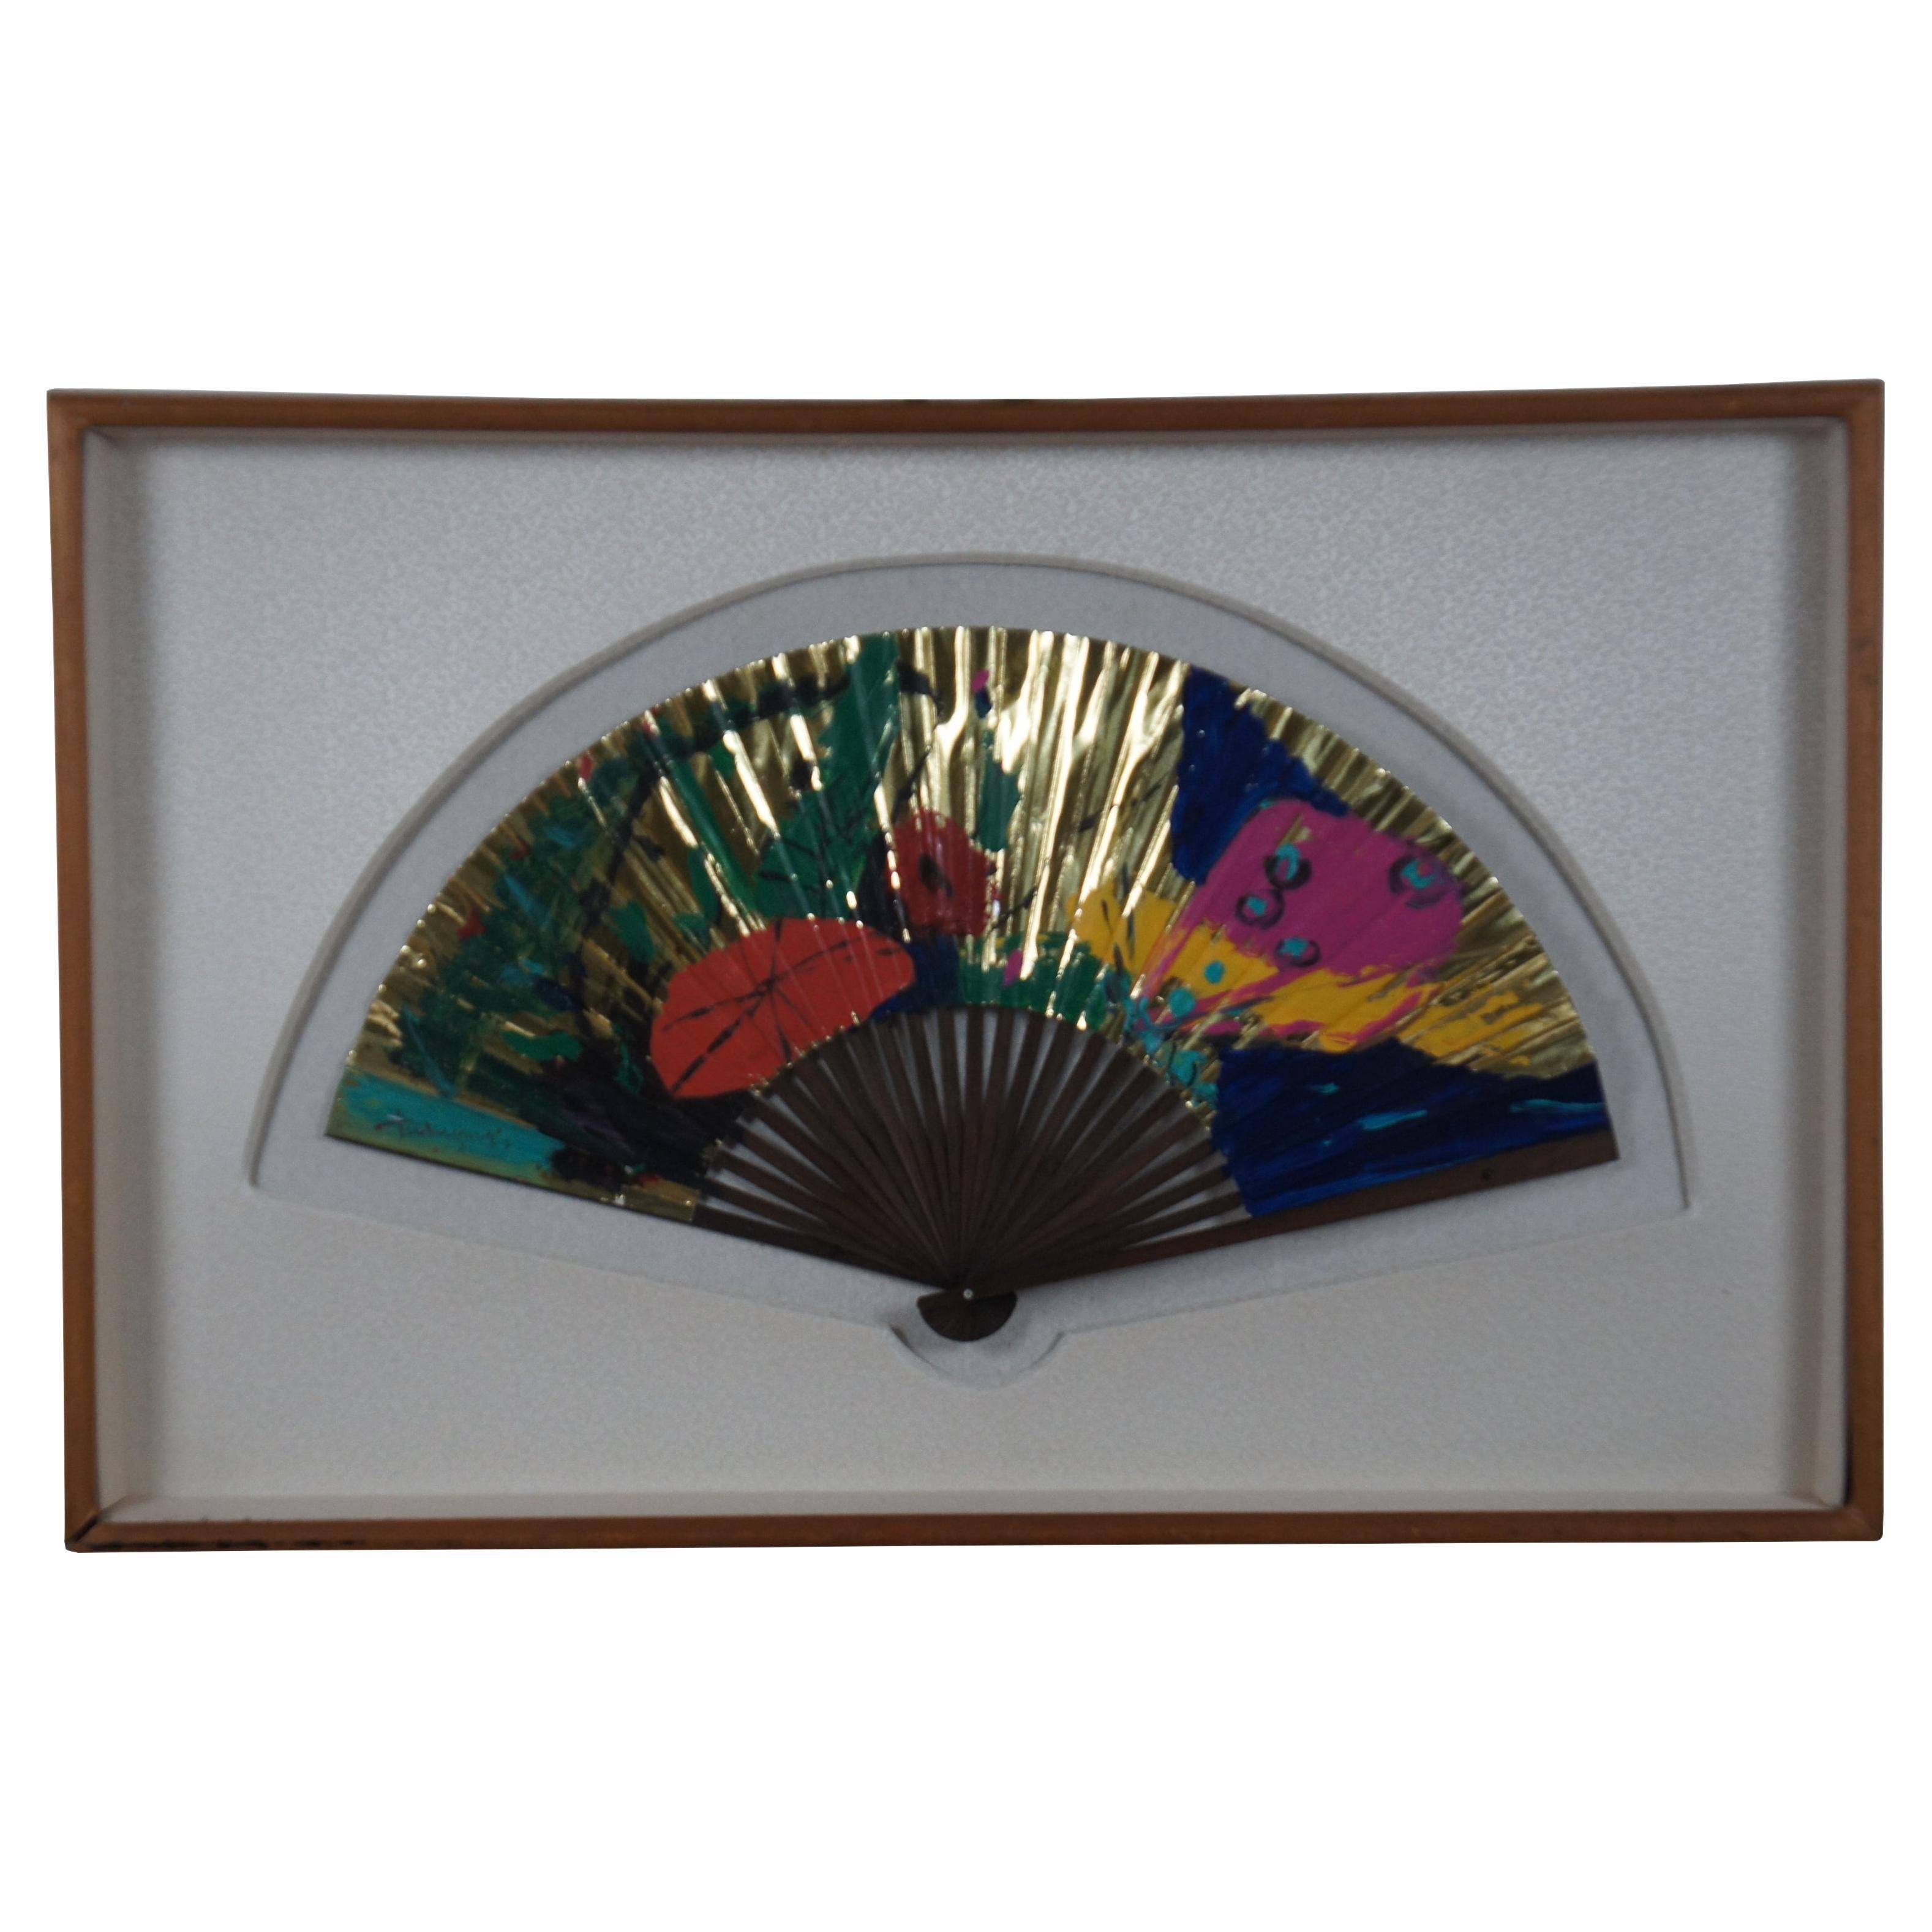 Vintage large hand painted golden fan by Tak-Young Jung from his 1991 solo exhibition “The Admiration of Life Through the Symbolization of Colors“ at the Modern Art Gallery in Los Angeles, CA. “Long regarded as paradigmatic in histories of modern